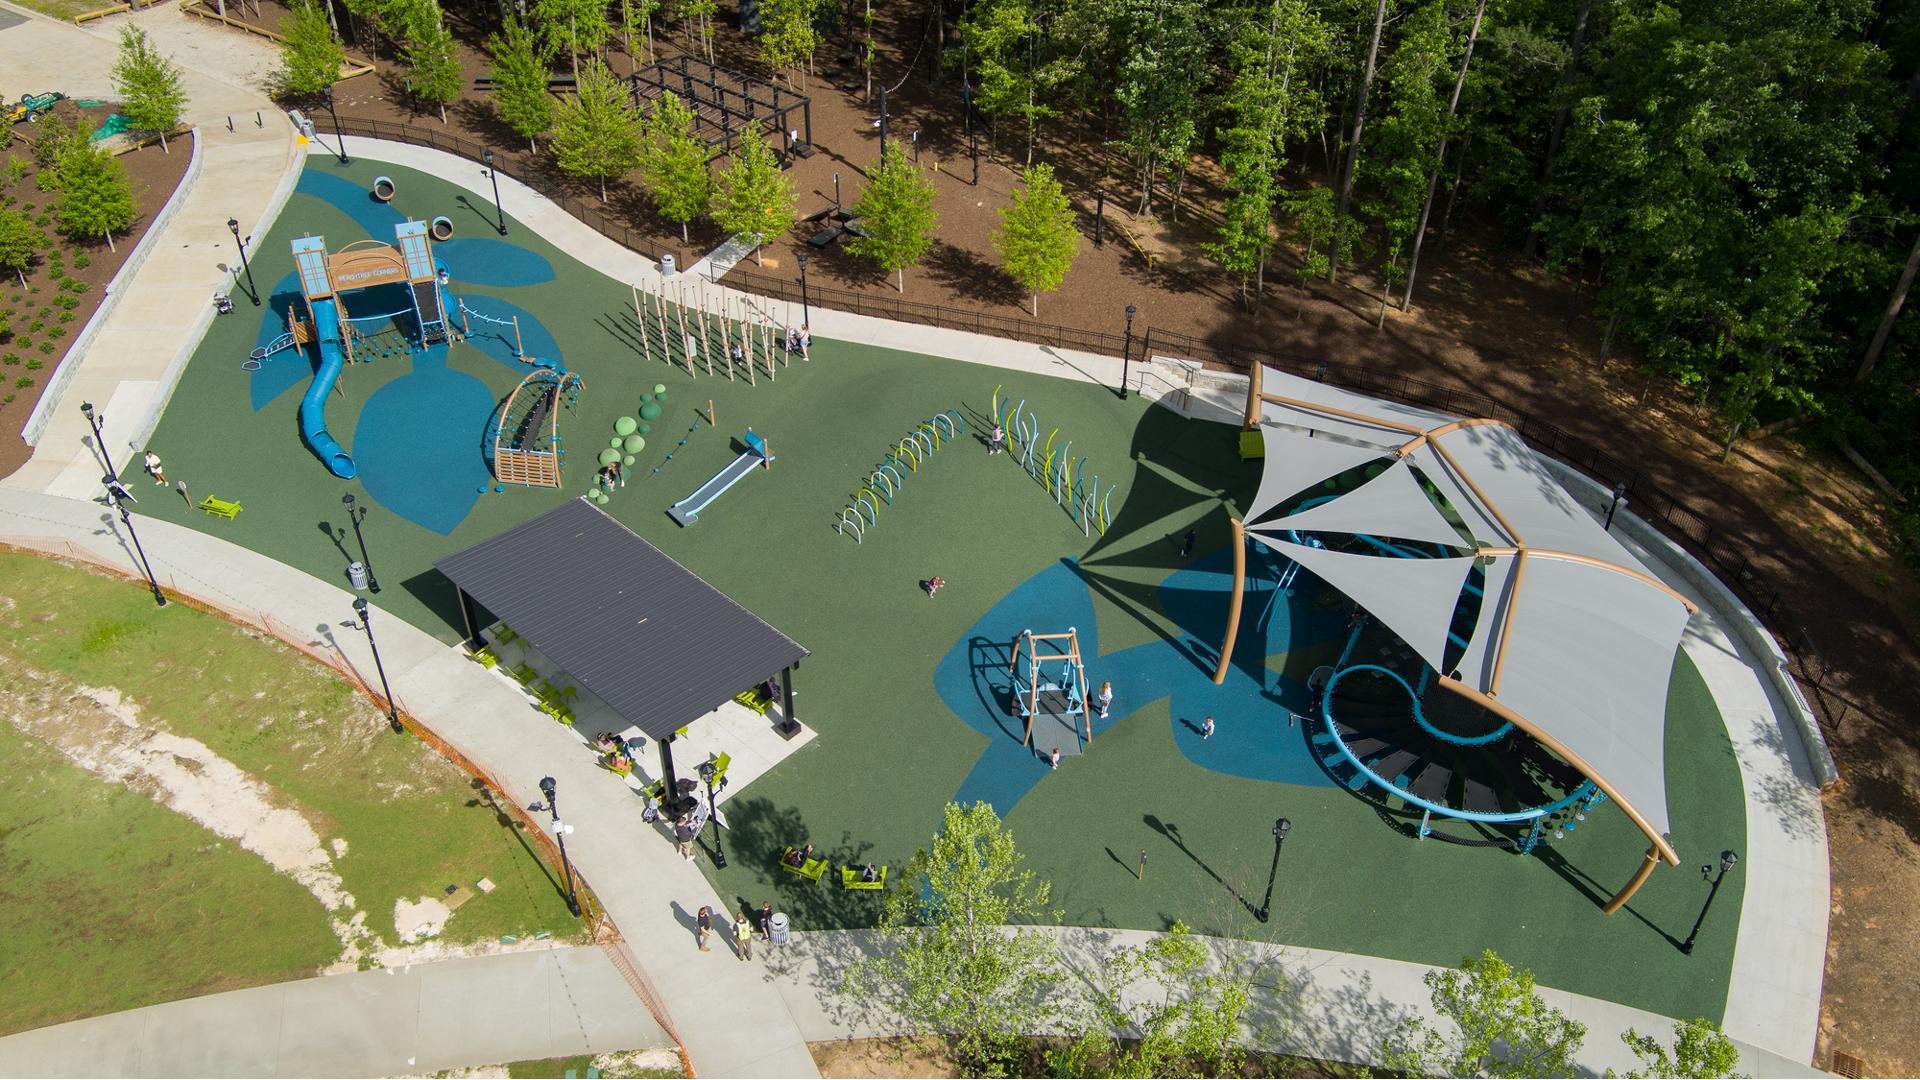 Bird's eye view of a large inclusive playground with a shade system over the unique figure eight shaped play structure.